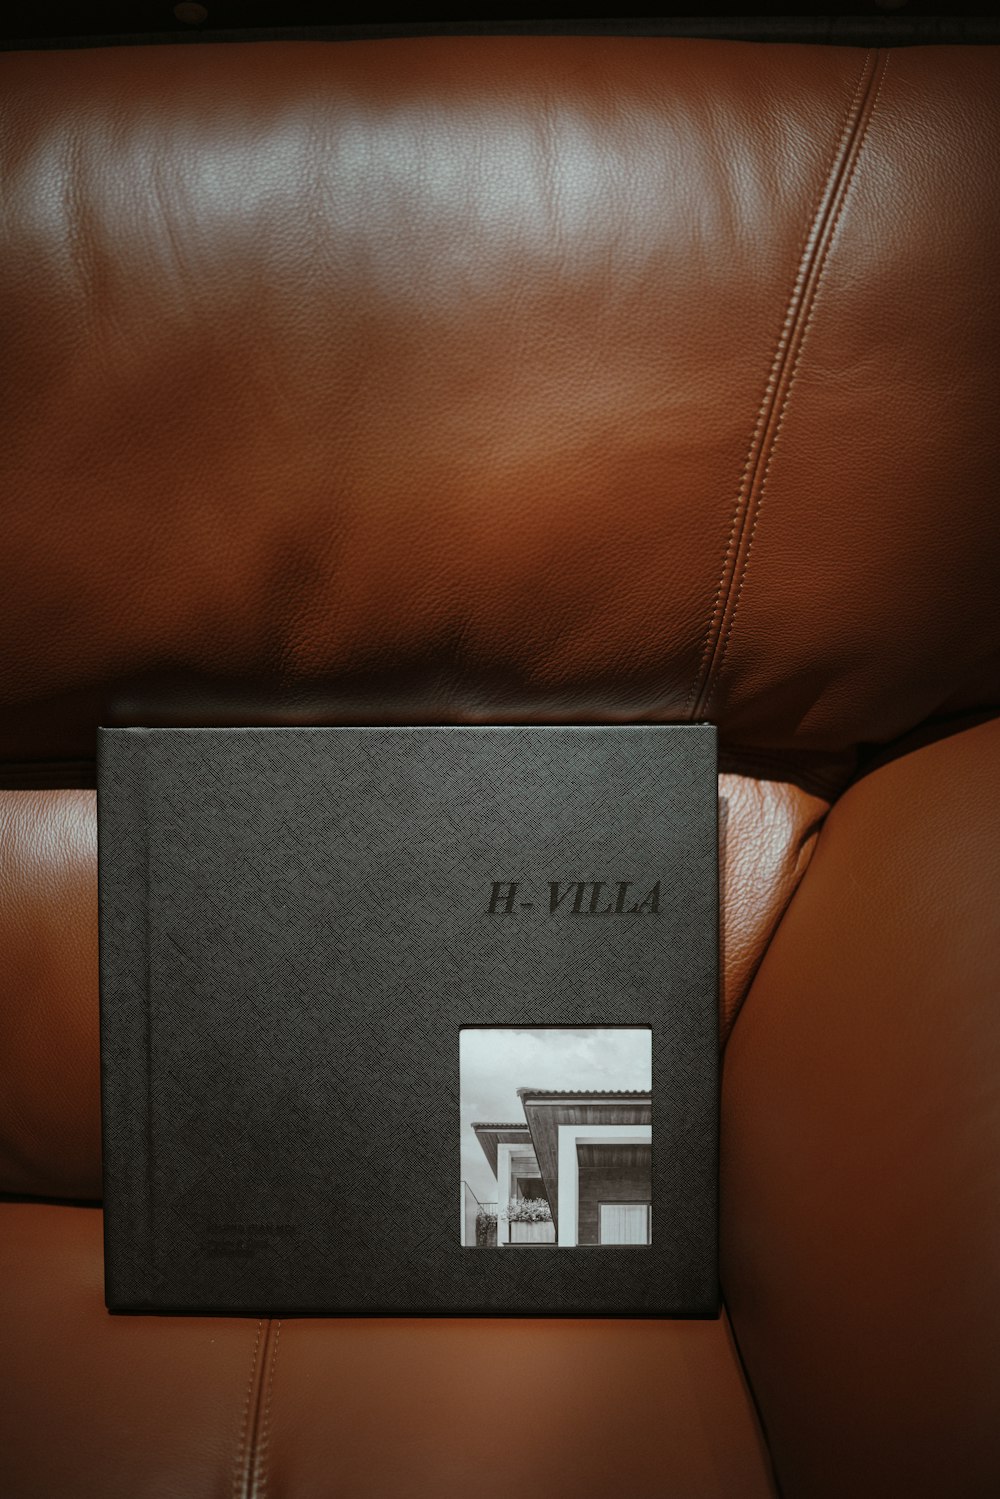 a book sitting on top of a brown leather couch